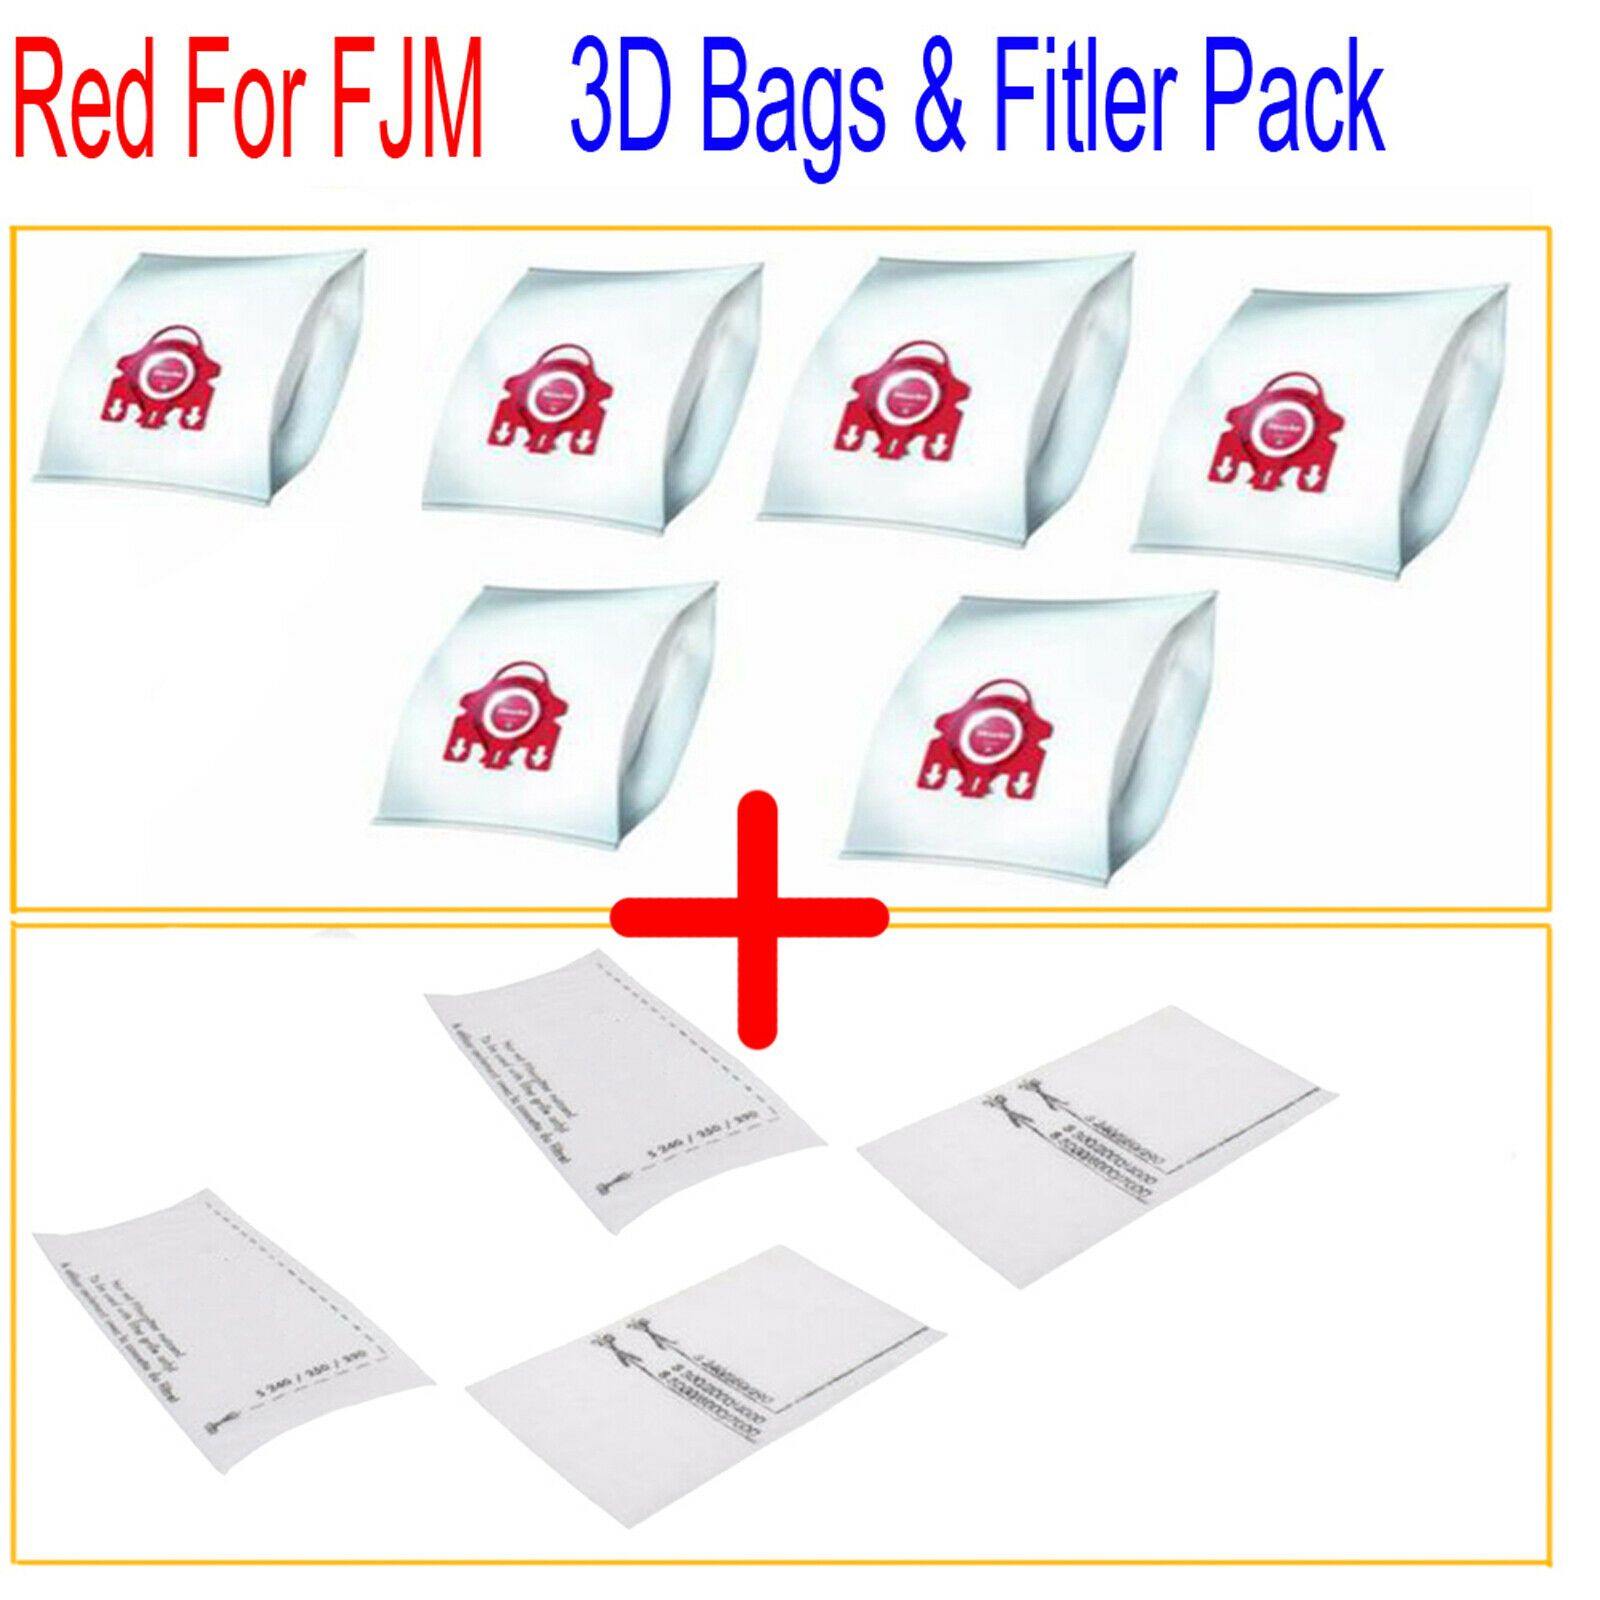 6X Vacuum Cleaner Bags + 4 Filters For Miele S312 S312i Festival Tri-Colour S324 Sparesbarn